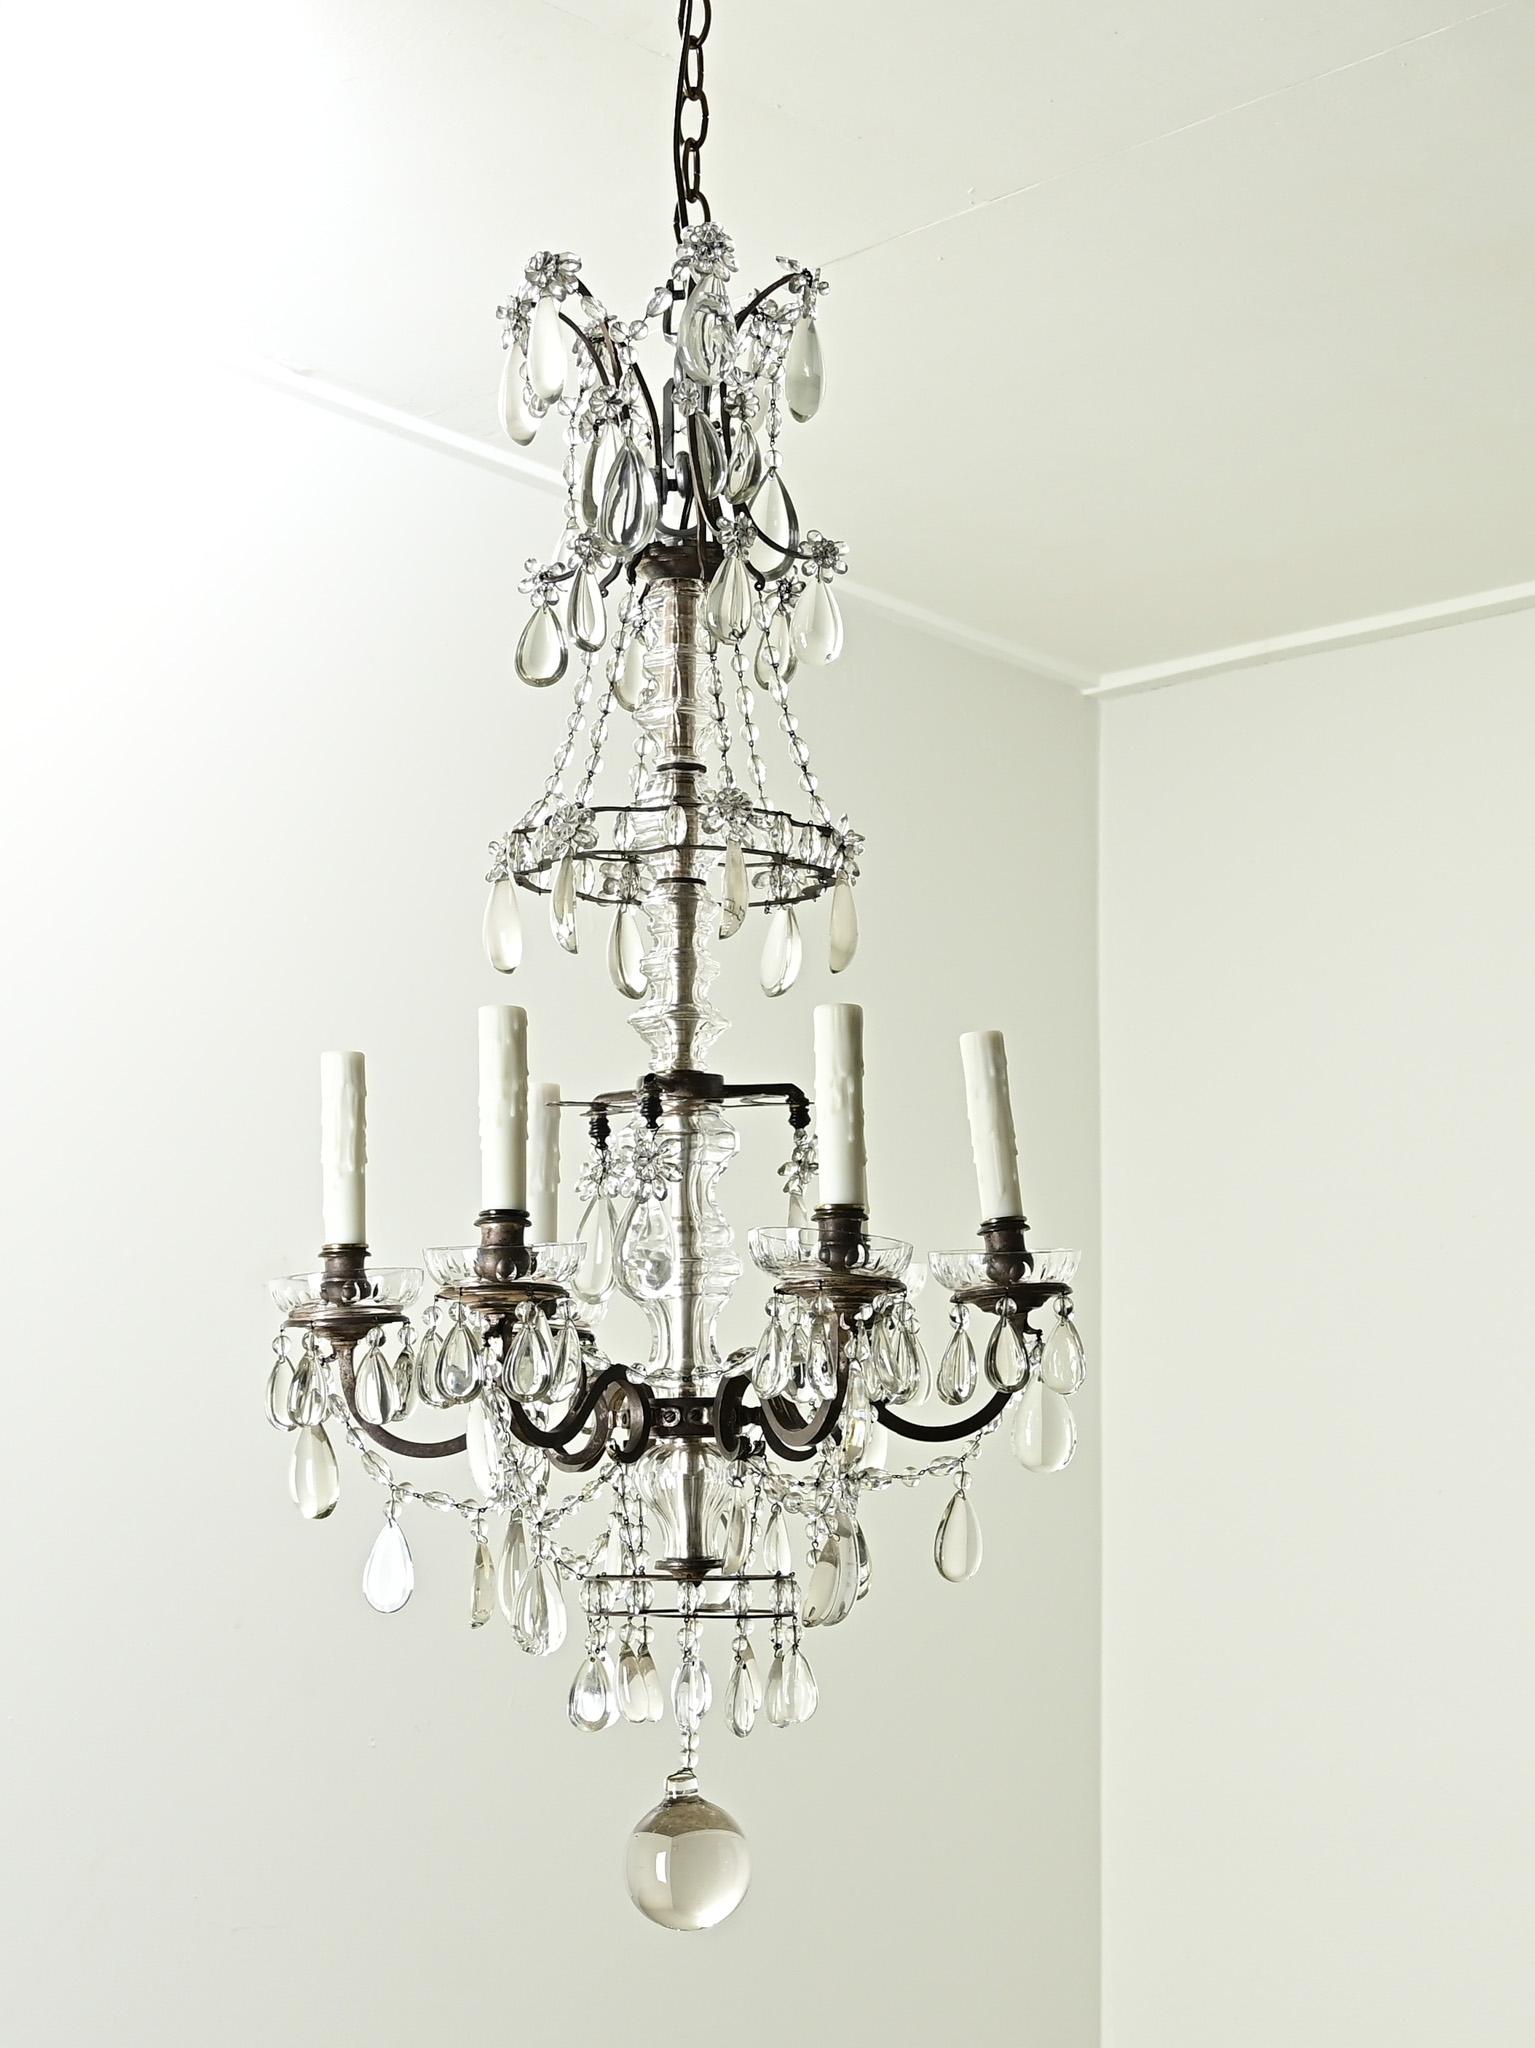 An impressive French six light brass and crystal chandelier from the 1800’s. This chandelier has a brass frame with cut crystal drops and six curved chandelier arms with faux wax candle covers. You’ll find playful patterns of cut crystal drop, swaps